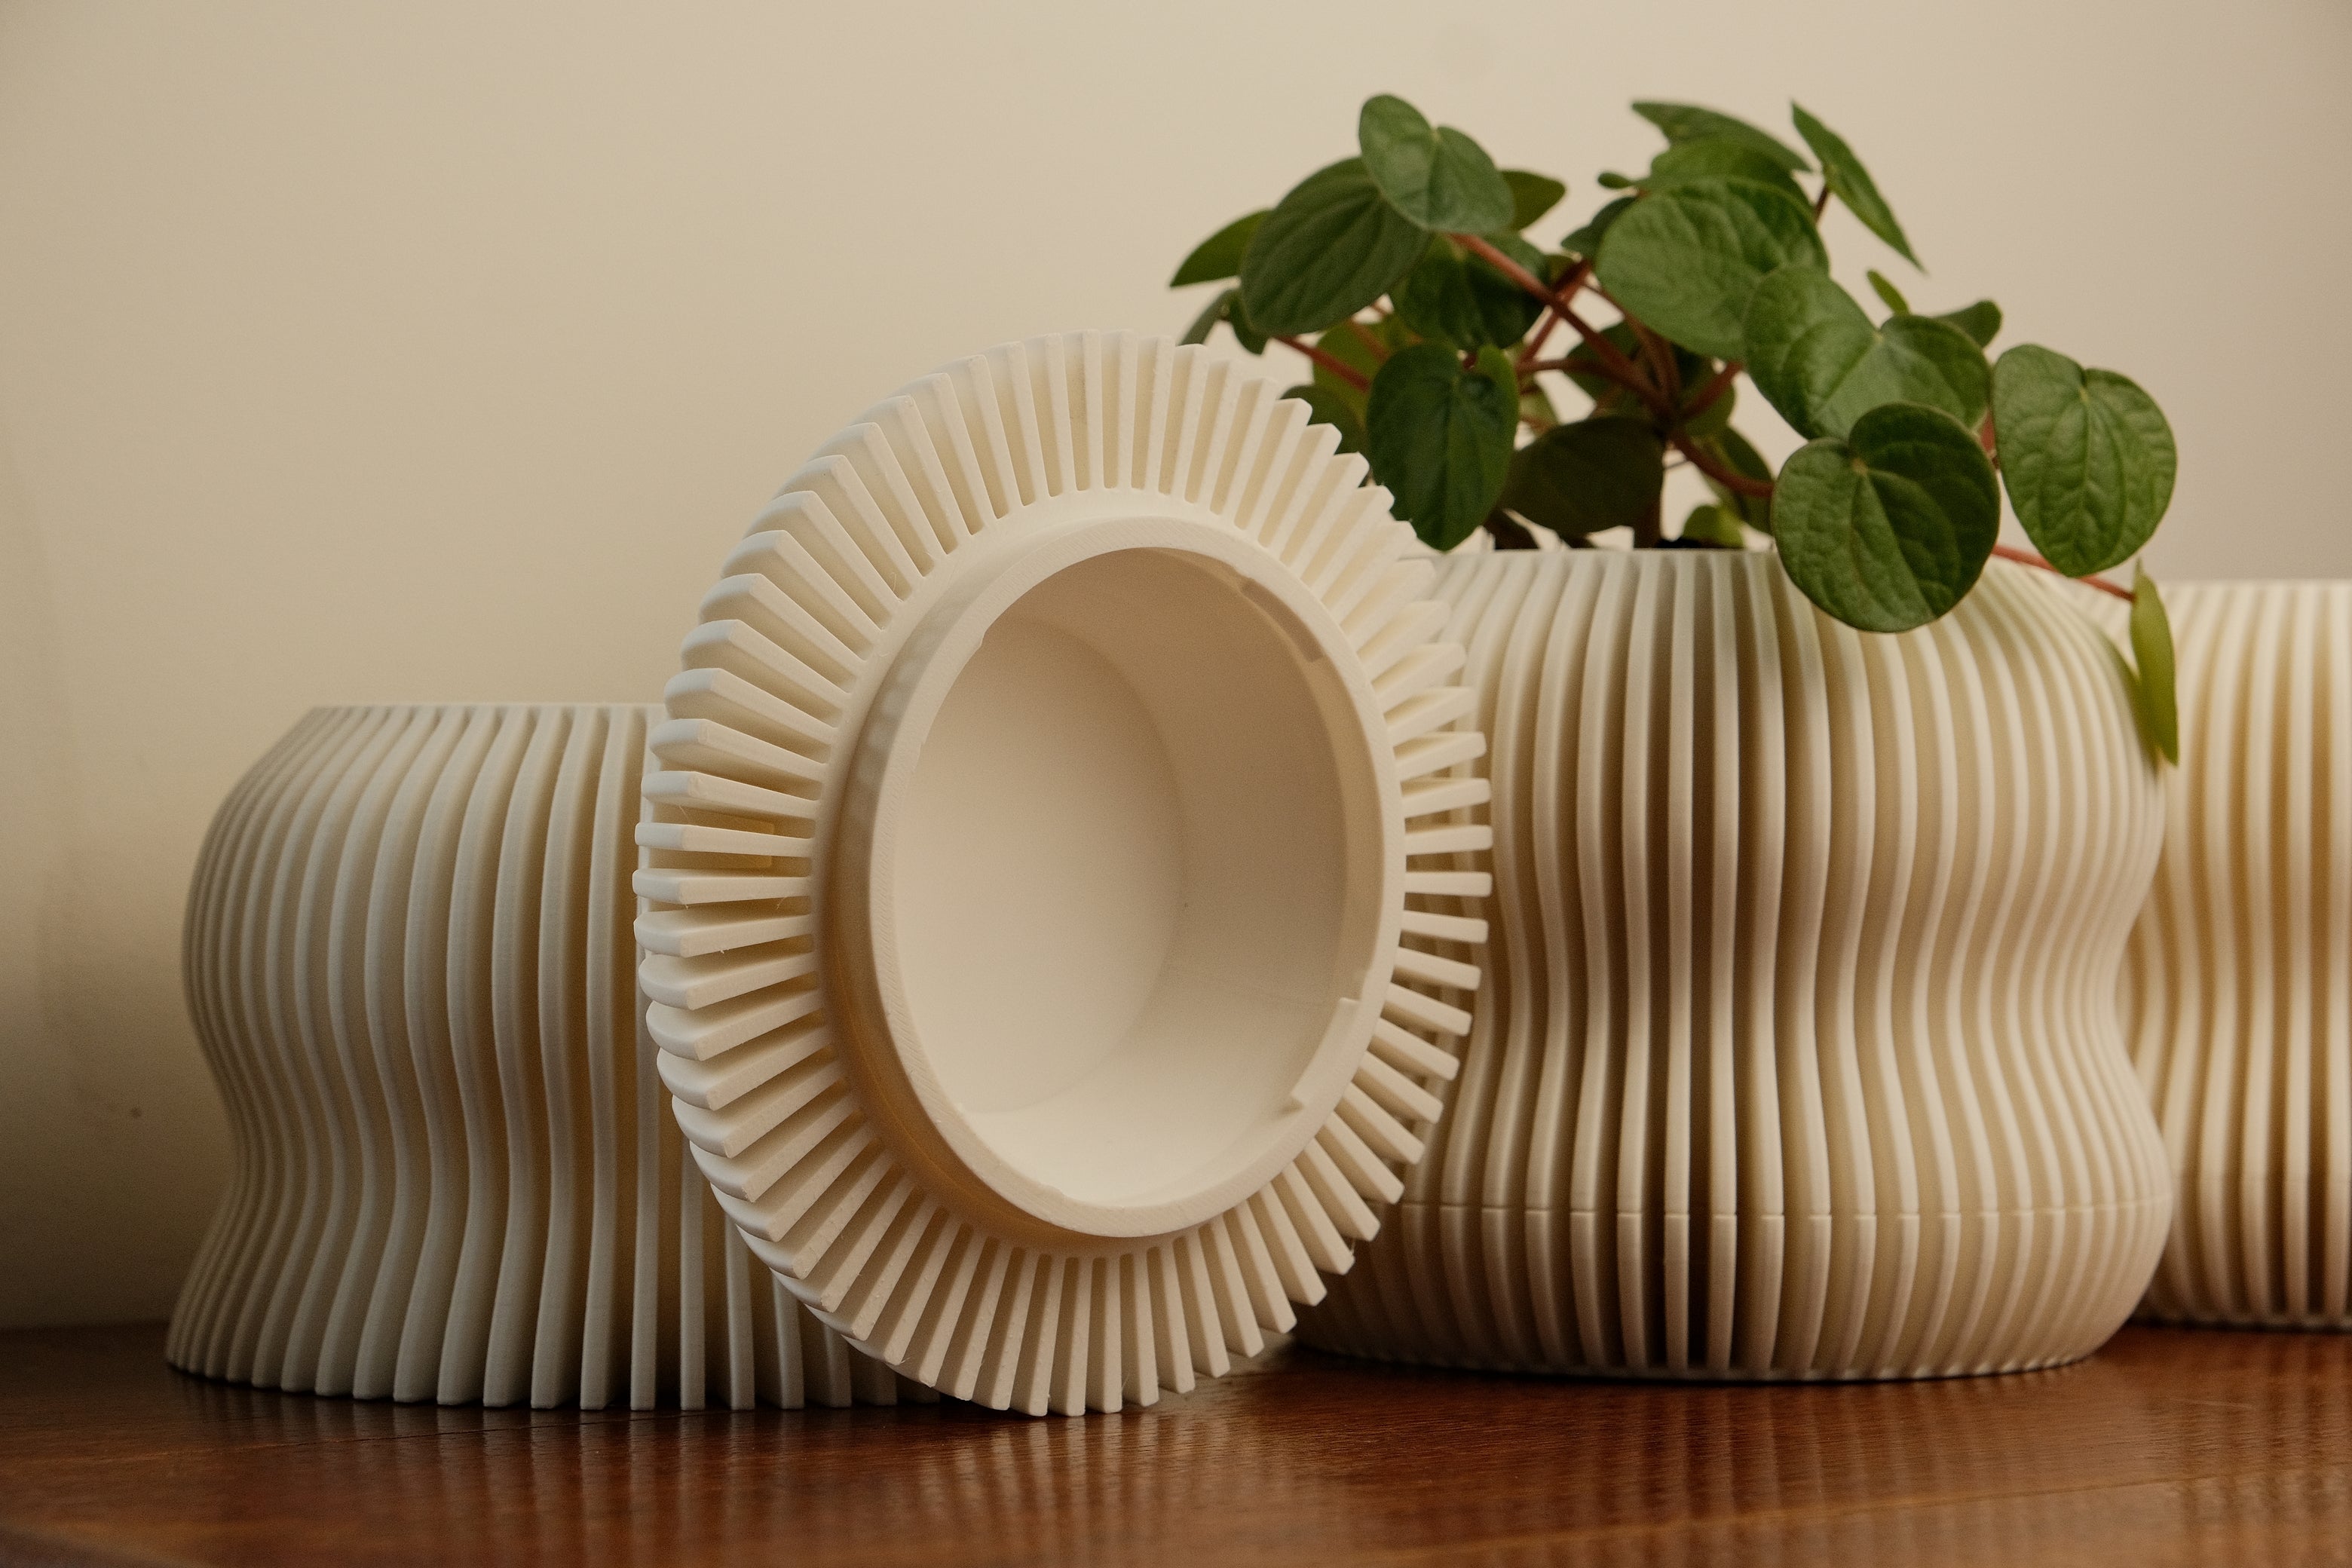 Selene Planter - Indoor Plant Pot with Drainage Tray Elevate your indoor garden with our Selene Planter. With a double-bubble design, this plant pot with drainage offers both style and function. Crafted from biodegradable PLA, it's earth-friendly and easy